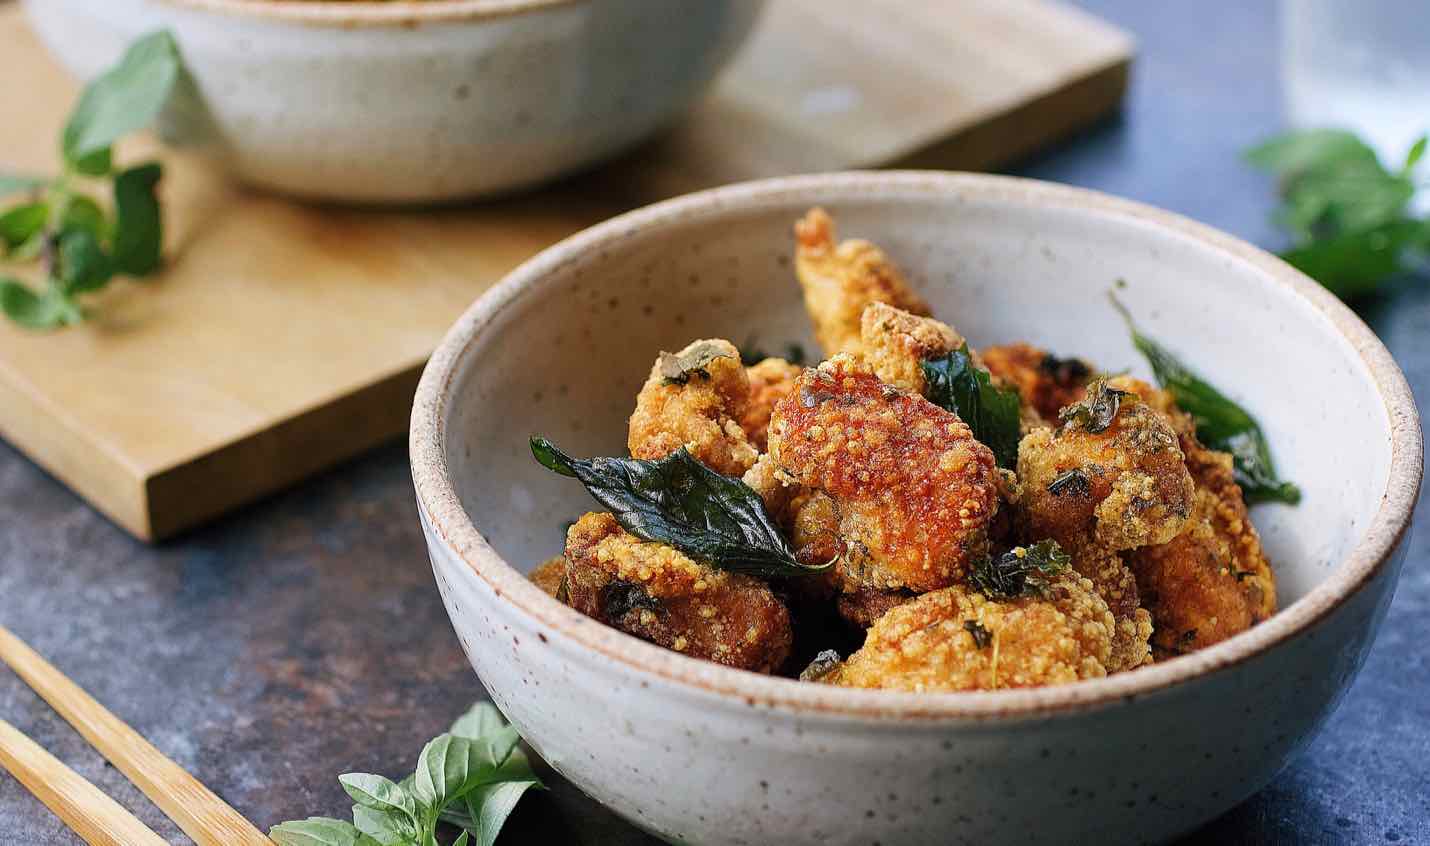 Basil Infused Taiwanese Crunchy Chicken Nuggets.